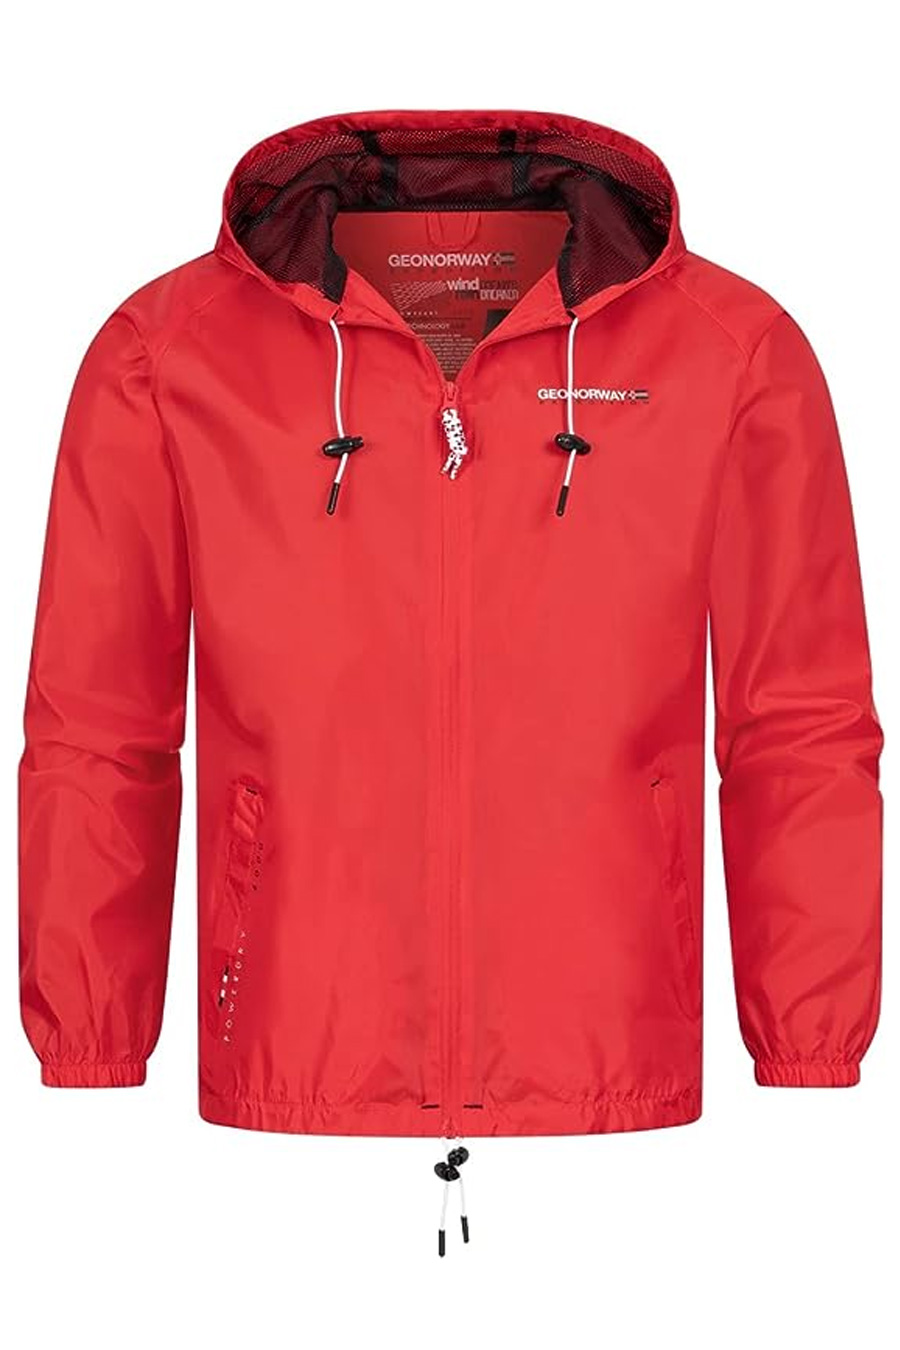 Regenmantel GEOGRAPHICAL NORWAY BOAT-Red